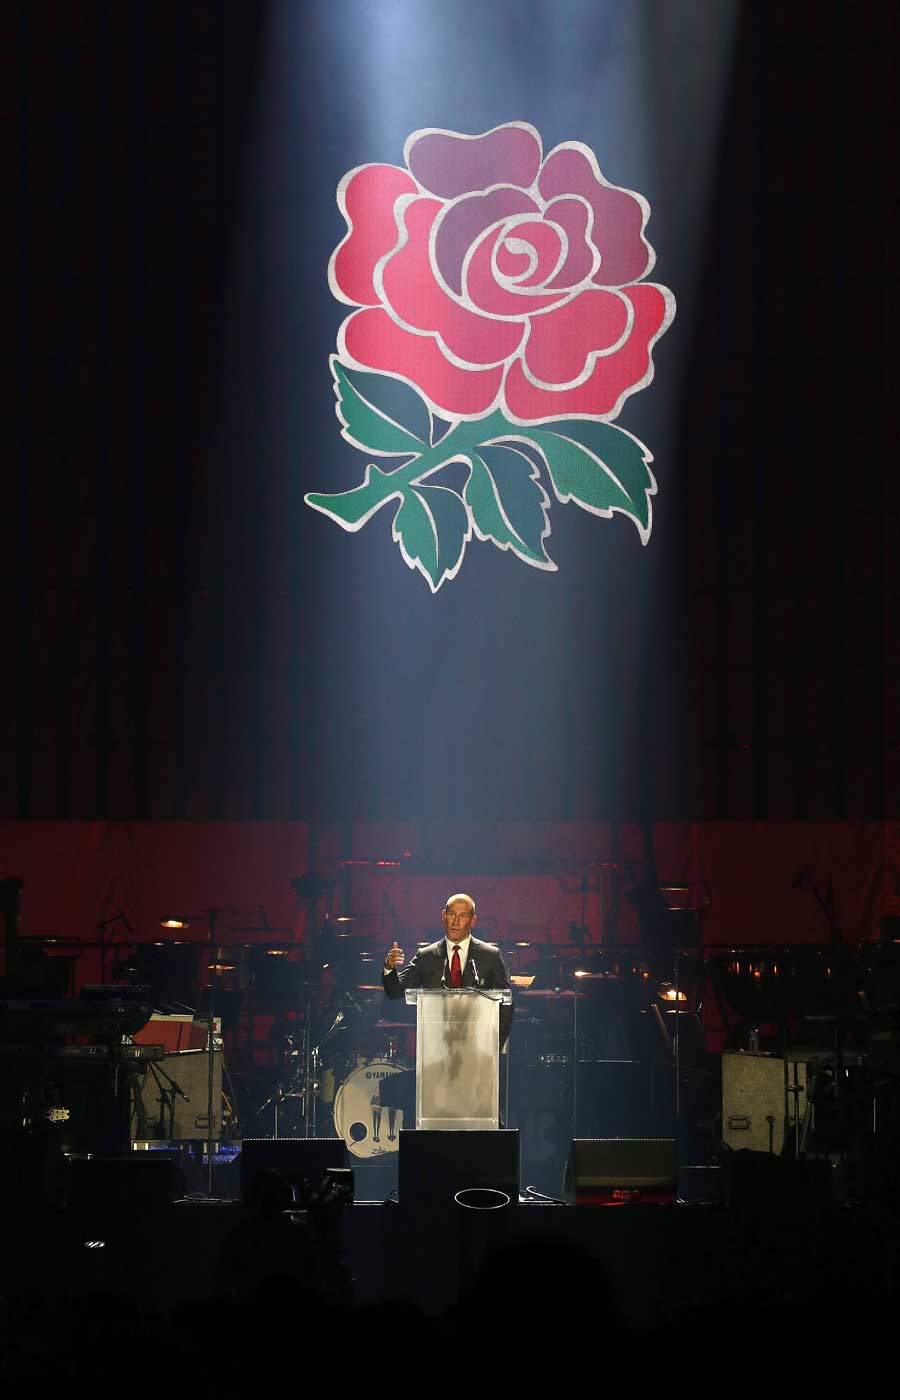 England's Stuart Lancaster addresses the crowd during the Wear The Rose Live official England send-off event, The O2 Arena, London, September 9, 2015 